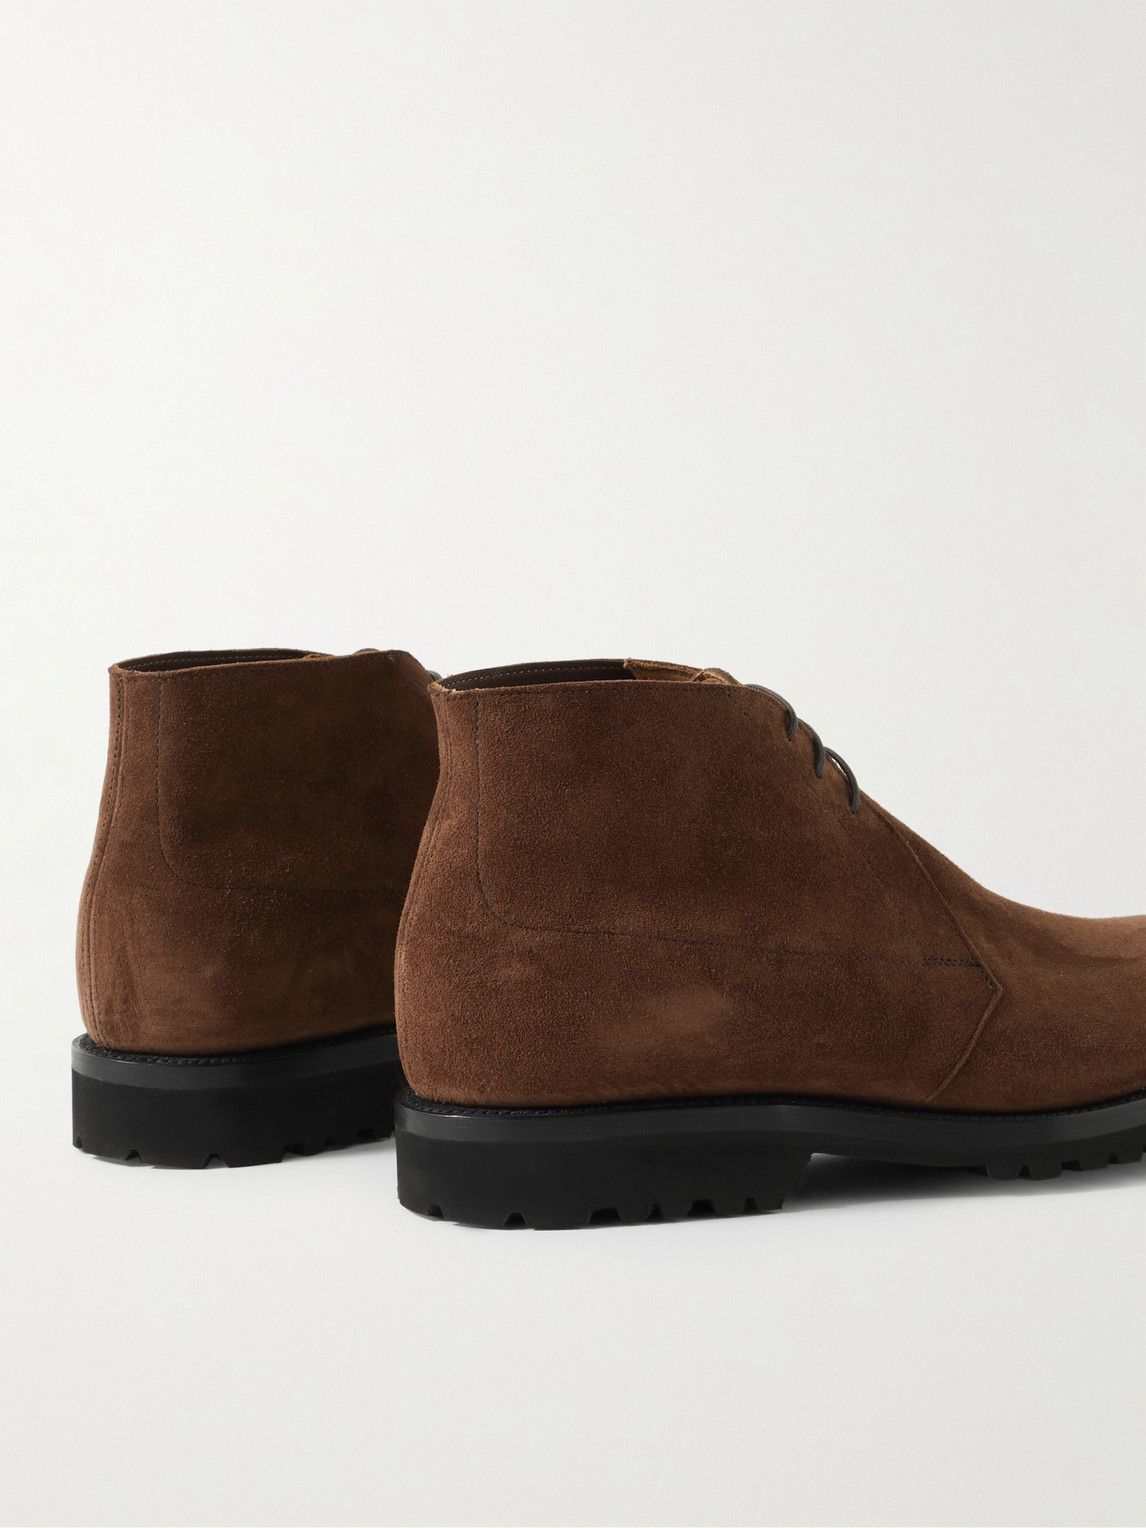 George Cleverley - Nathan Suede Chukka Boots - Brown George Cleverley